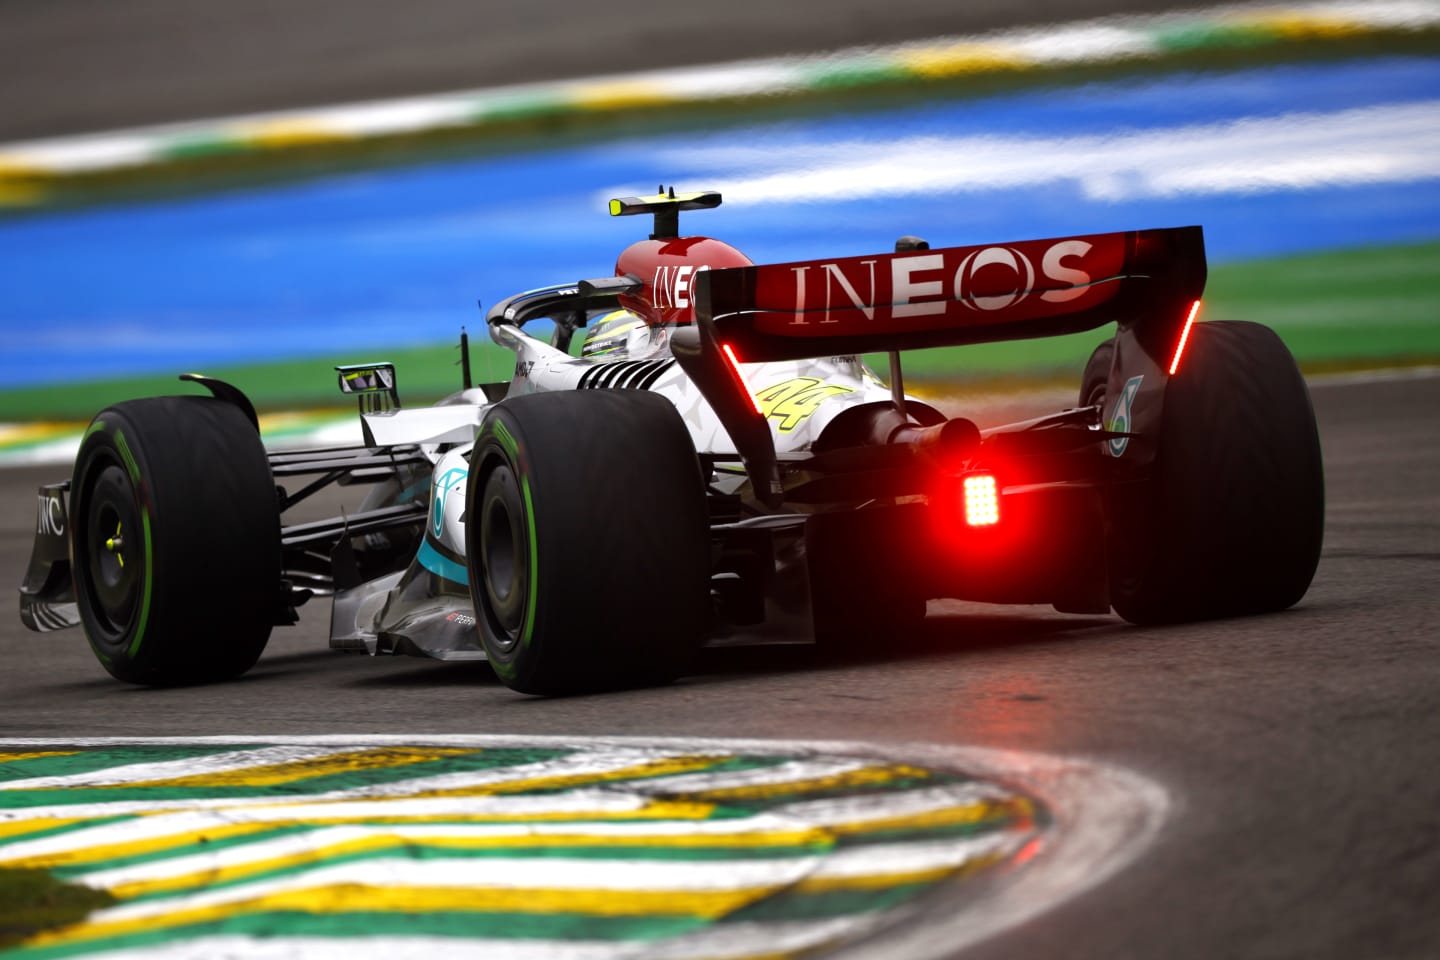 SAO PAULO, BRAZIL - NOVEMBER 11: Lewis Hamilton of Great Britain driving the (44) Mercedes AMG Petronas F1 Team W13 on track during qualifying ahead of the F1 Grand Prix of Brazil at Autodromo Jose Carlos Pace on November 11, 2022 in Sao Paulo, Brazil. (Photo by Jared C. Tilton/Getty Images)